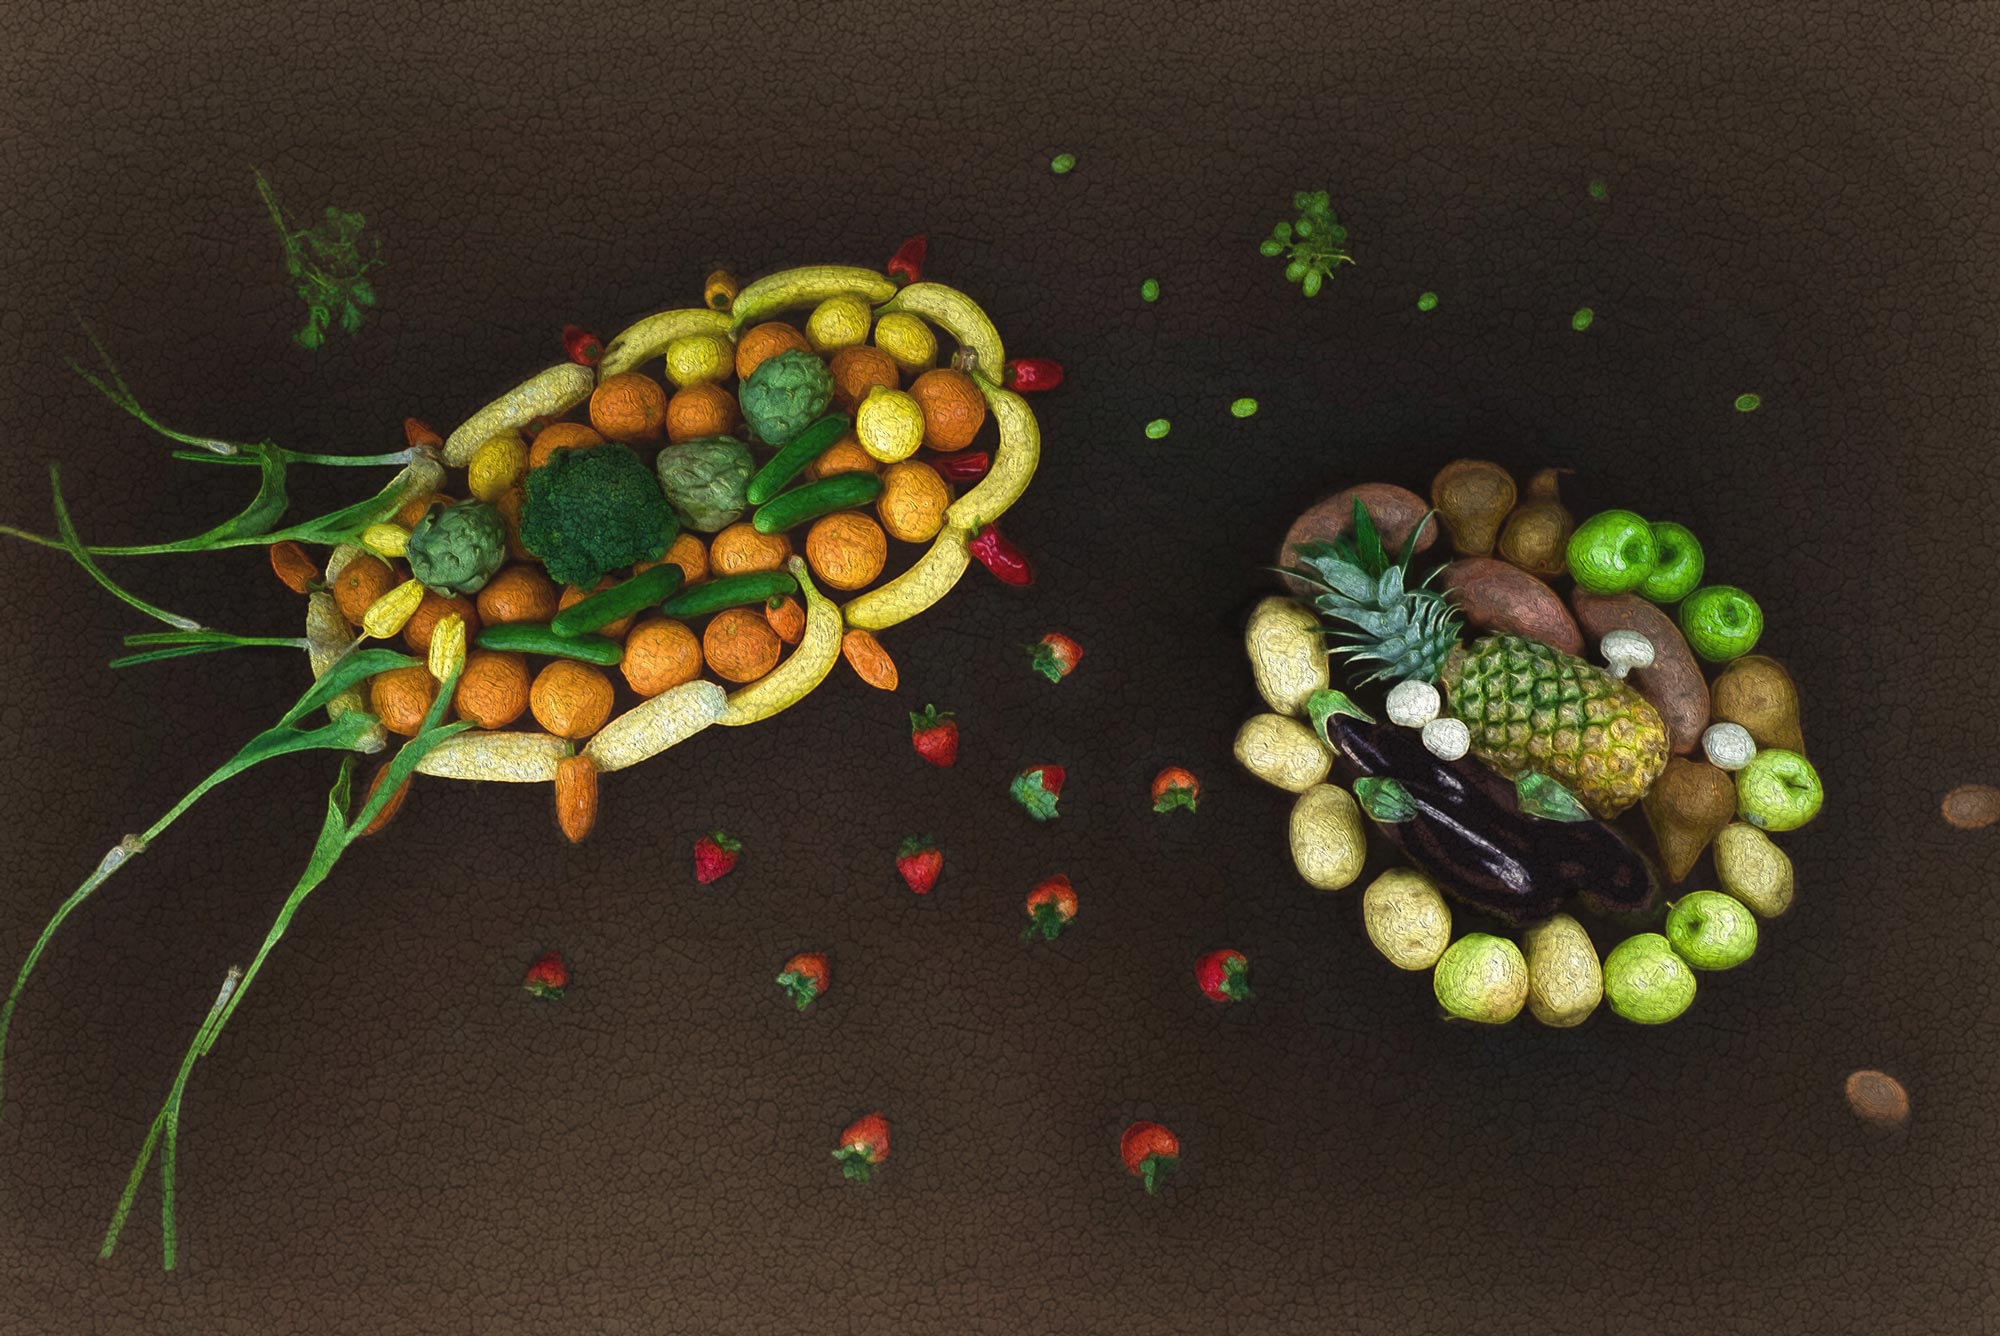 A photo of food shaped to look like microbes